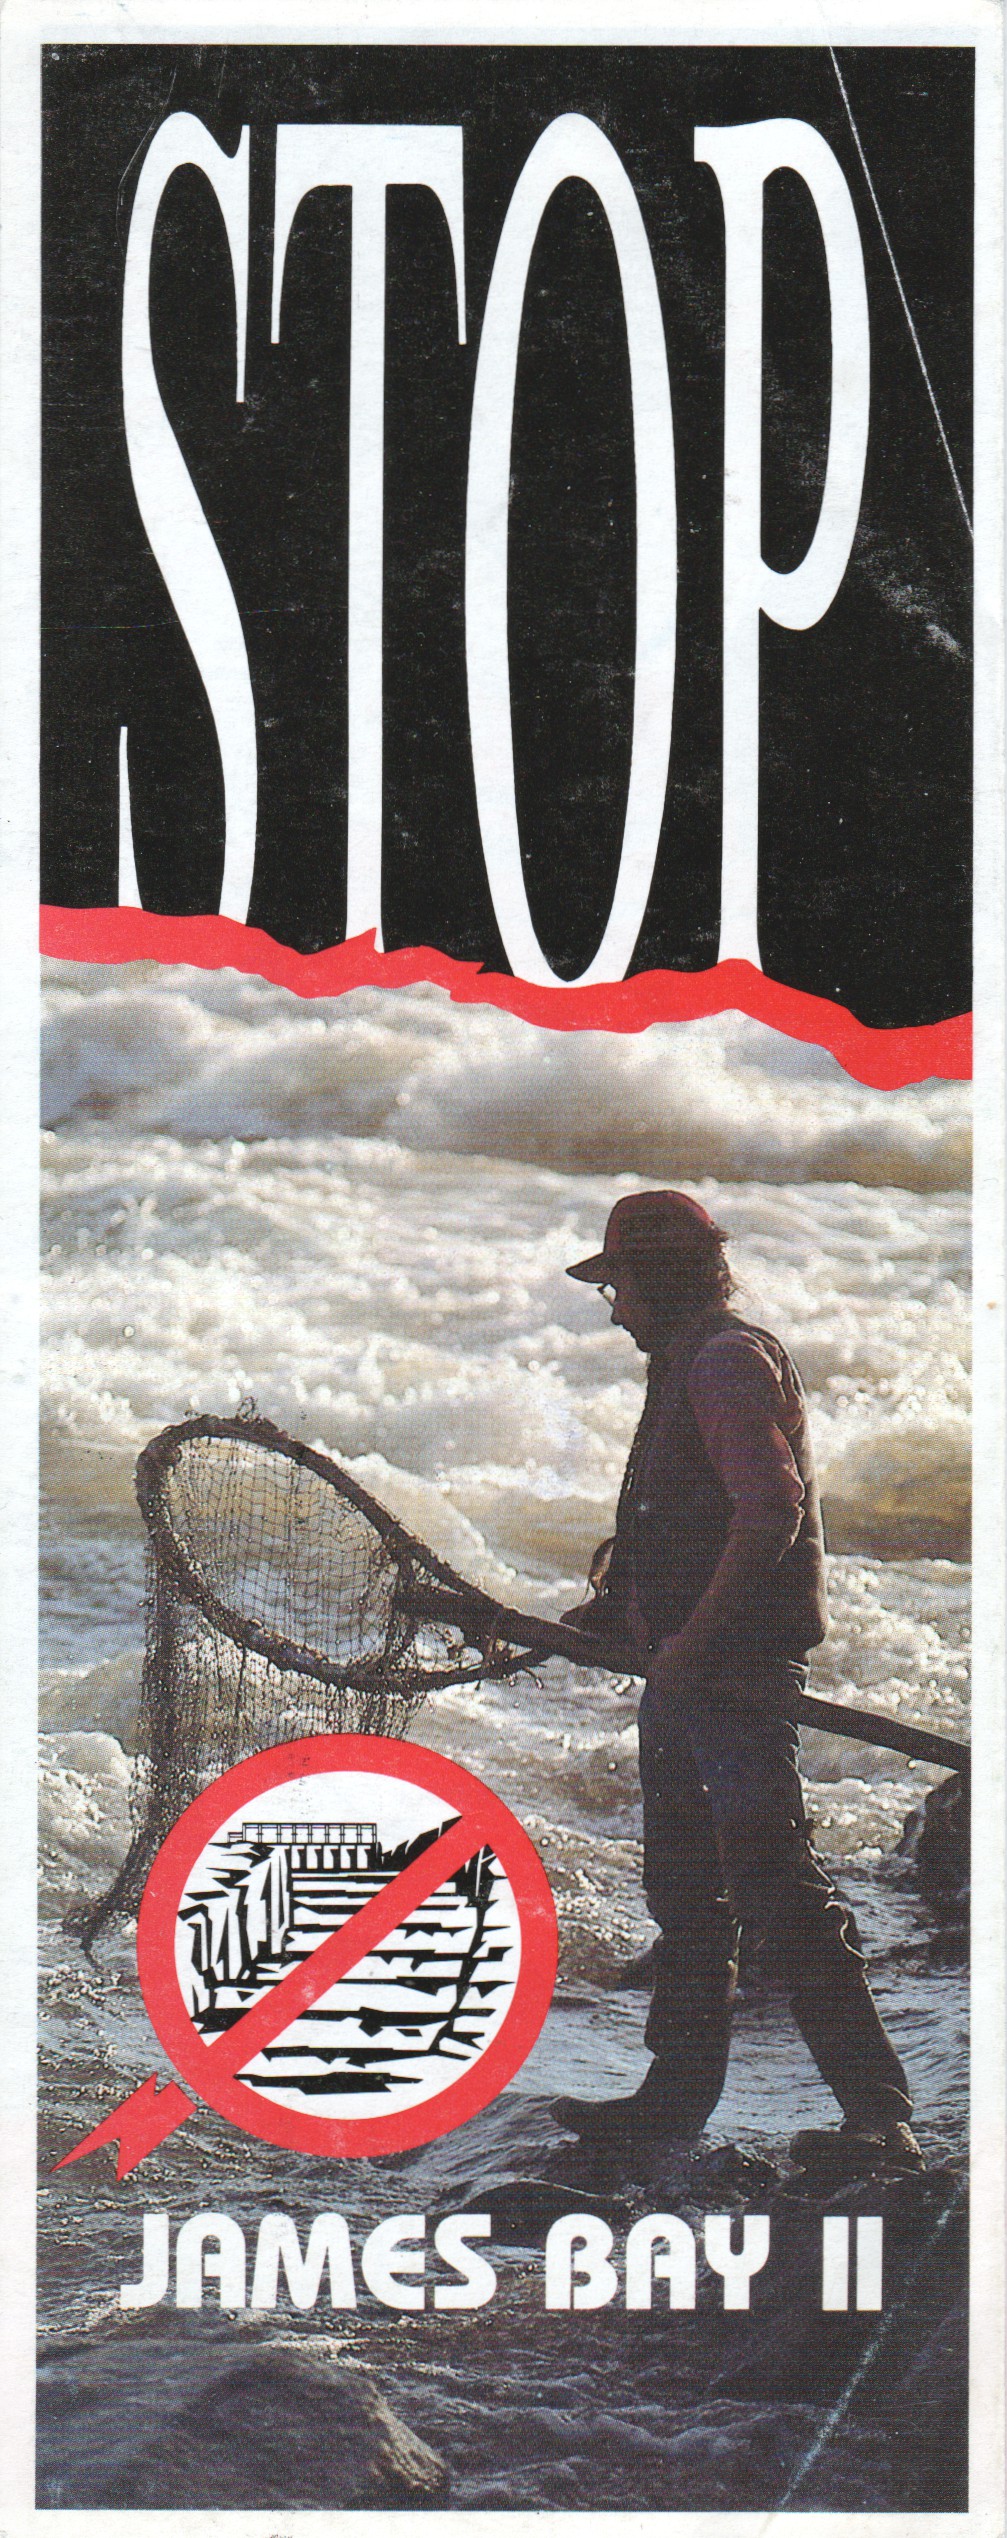 Stop James Bay II (Grand Council of the Cree, 1988)